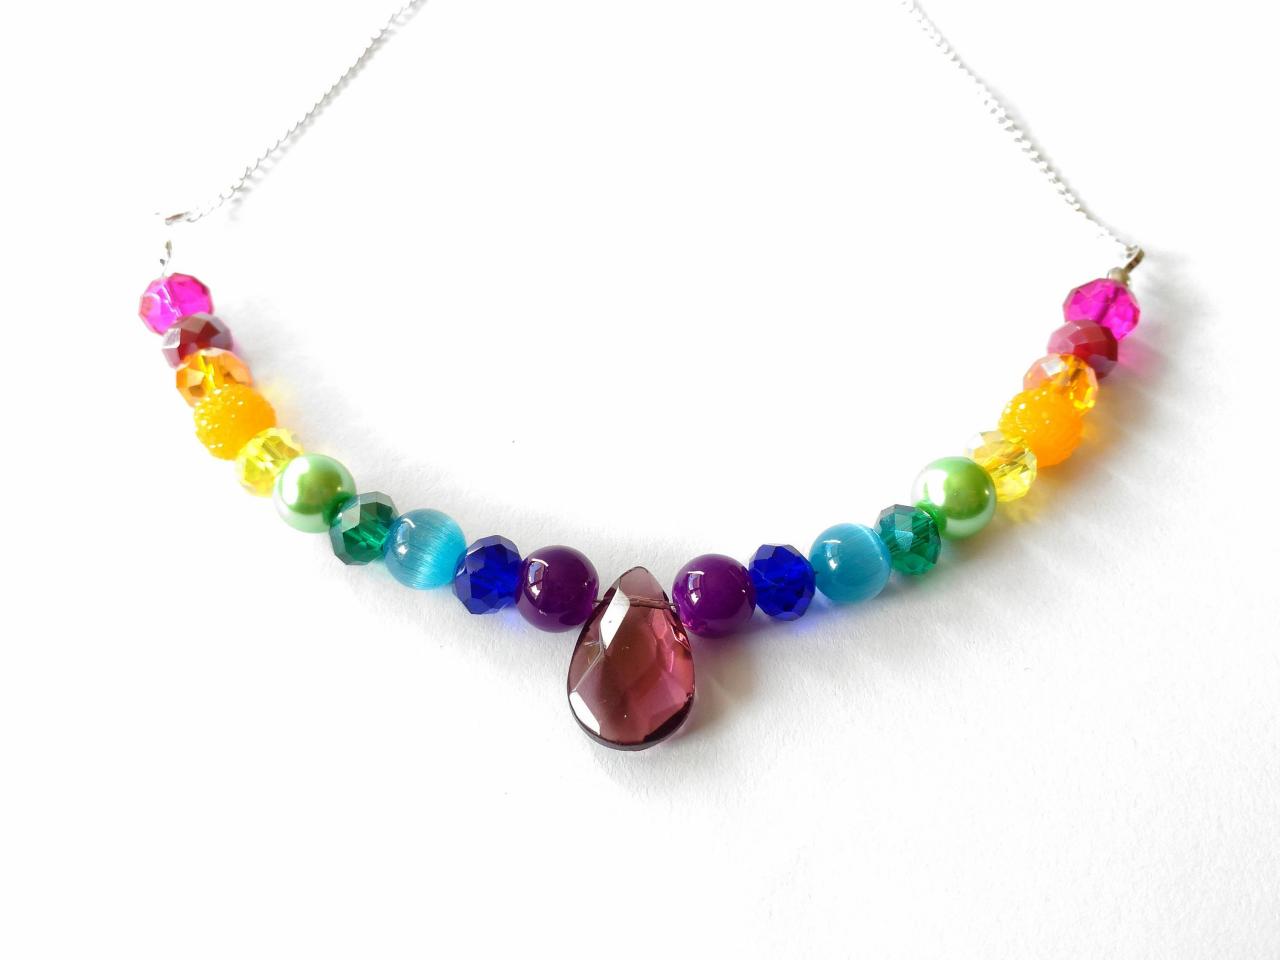 Rainbow Bead Necklace, 7 Chakra Necklace, Multicolor Beaded Necklace, Colorful Boho Necklace With Agate, Statement Jewelry, Gift For Her